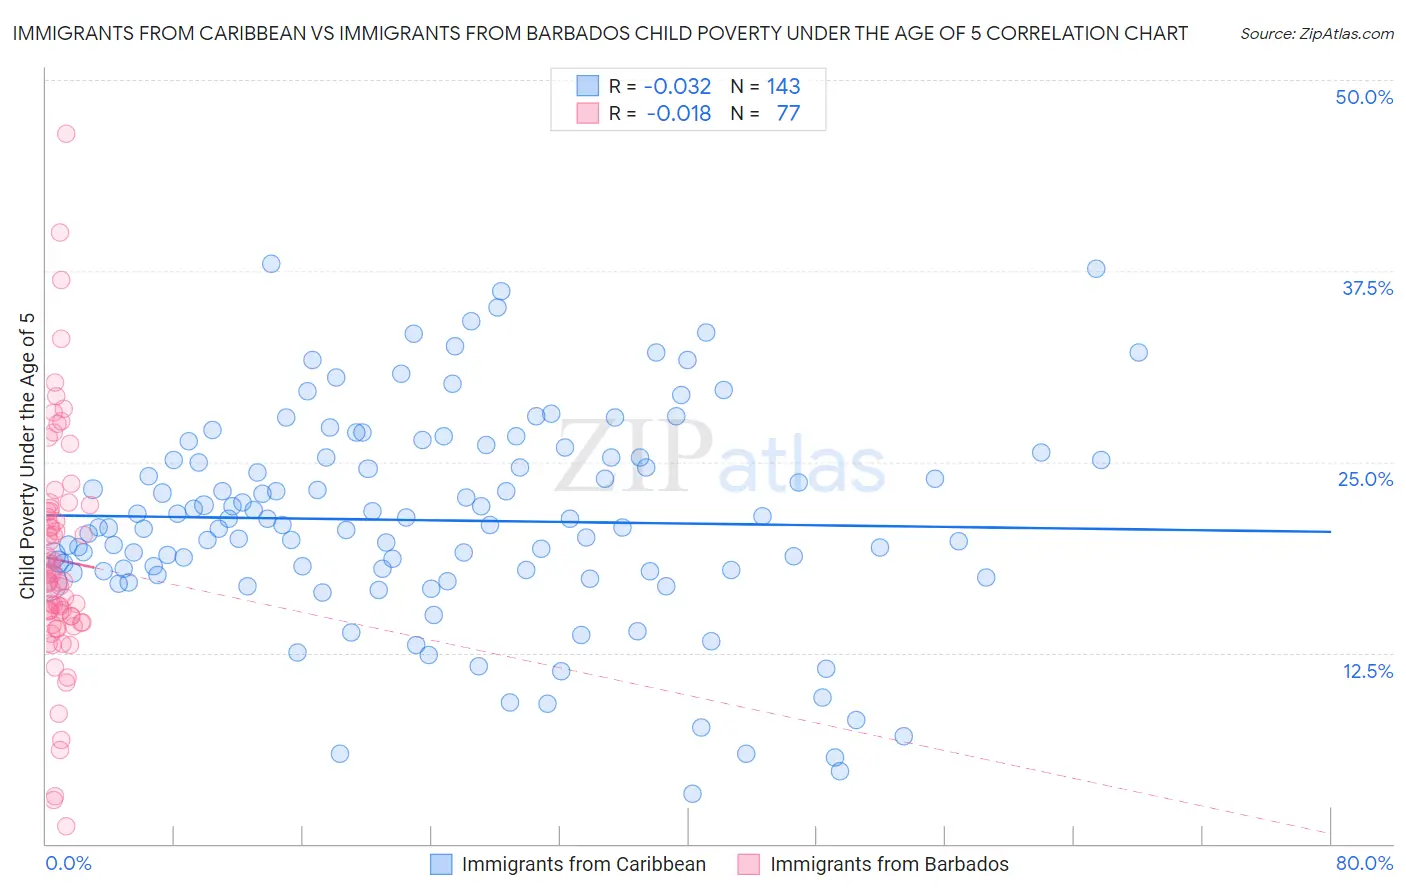 Immigrants from Caribbean vs Immigrants from Barbados Child Poverty Under the Age of 5